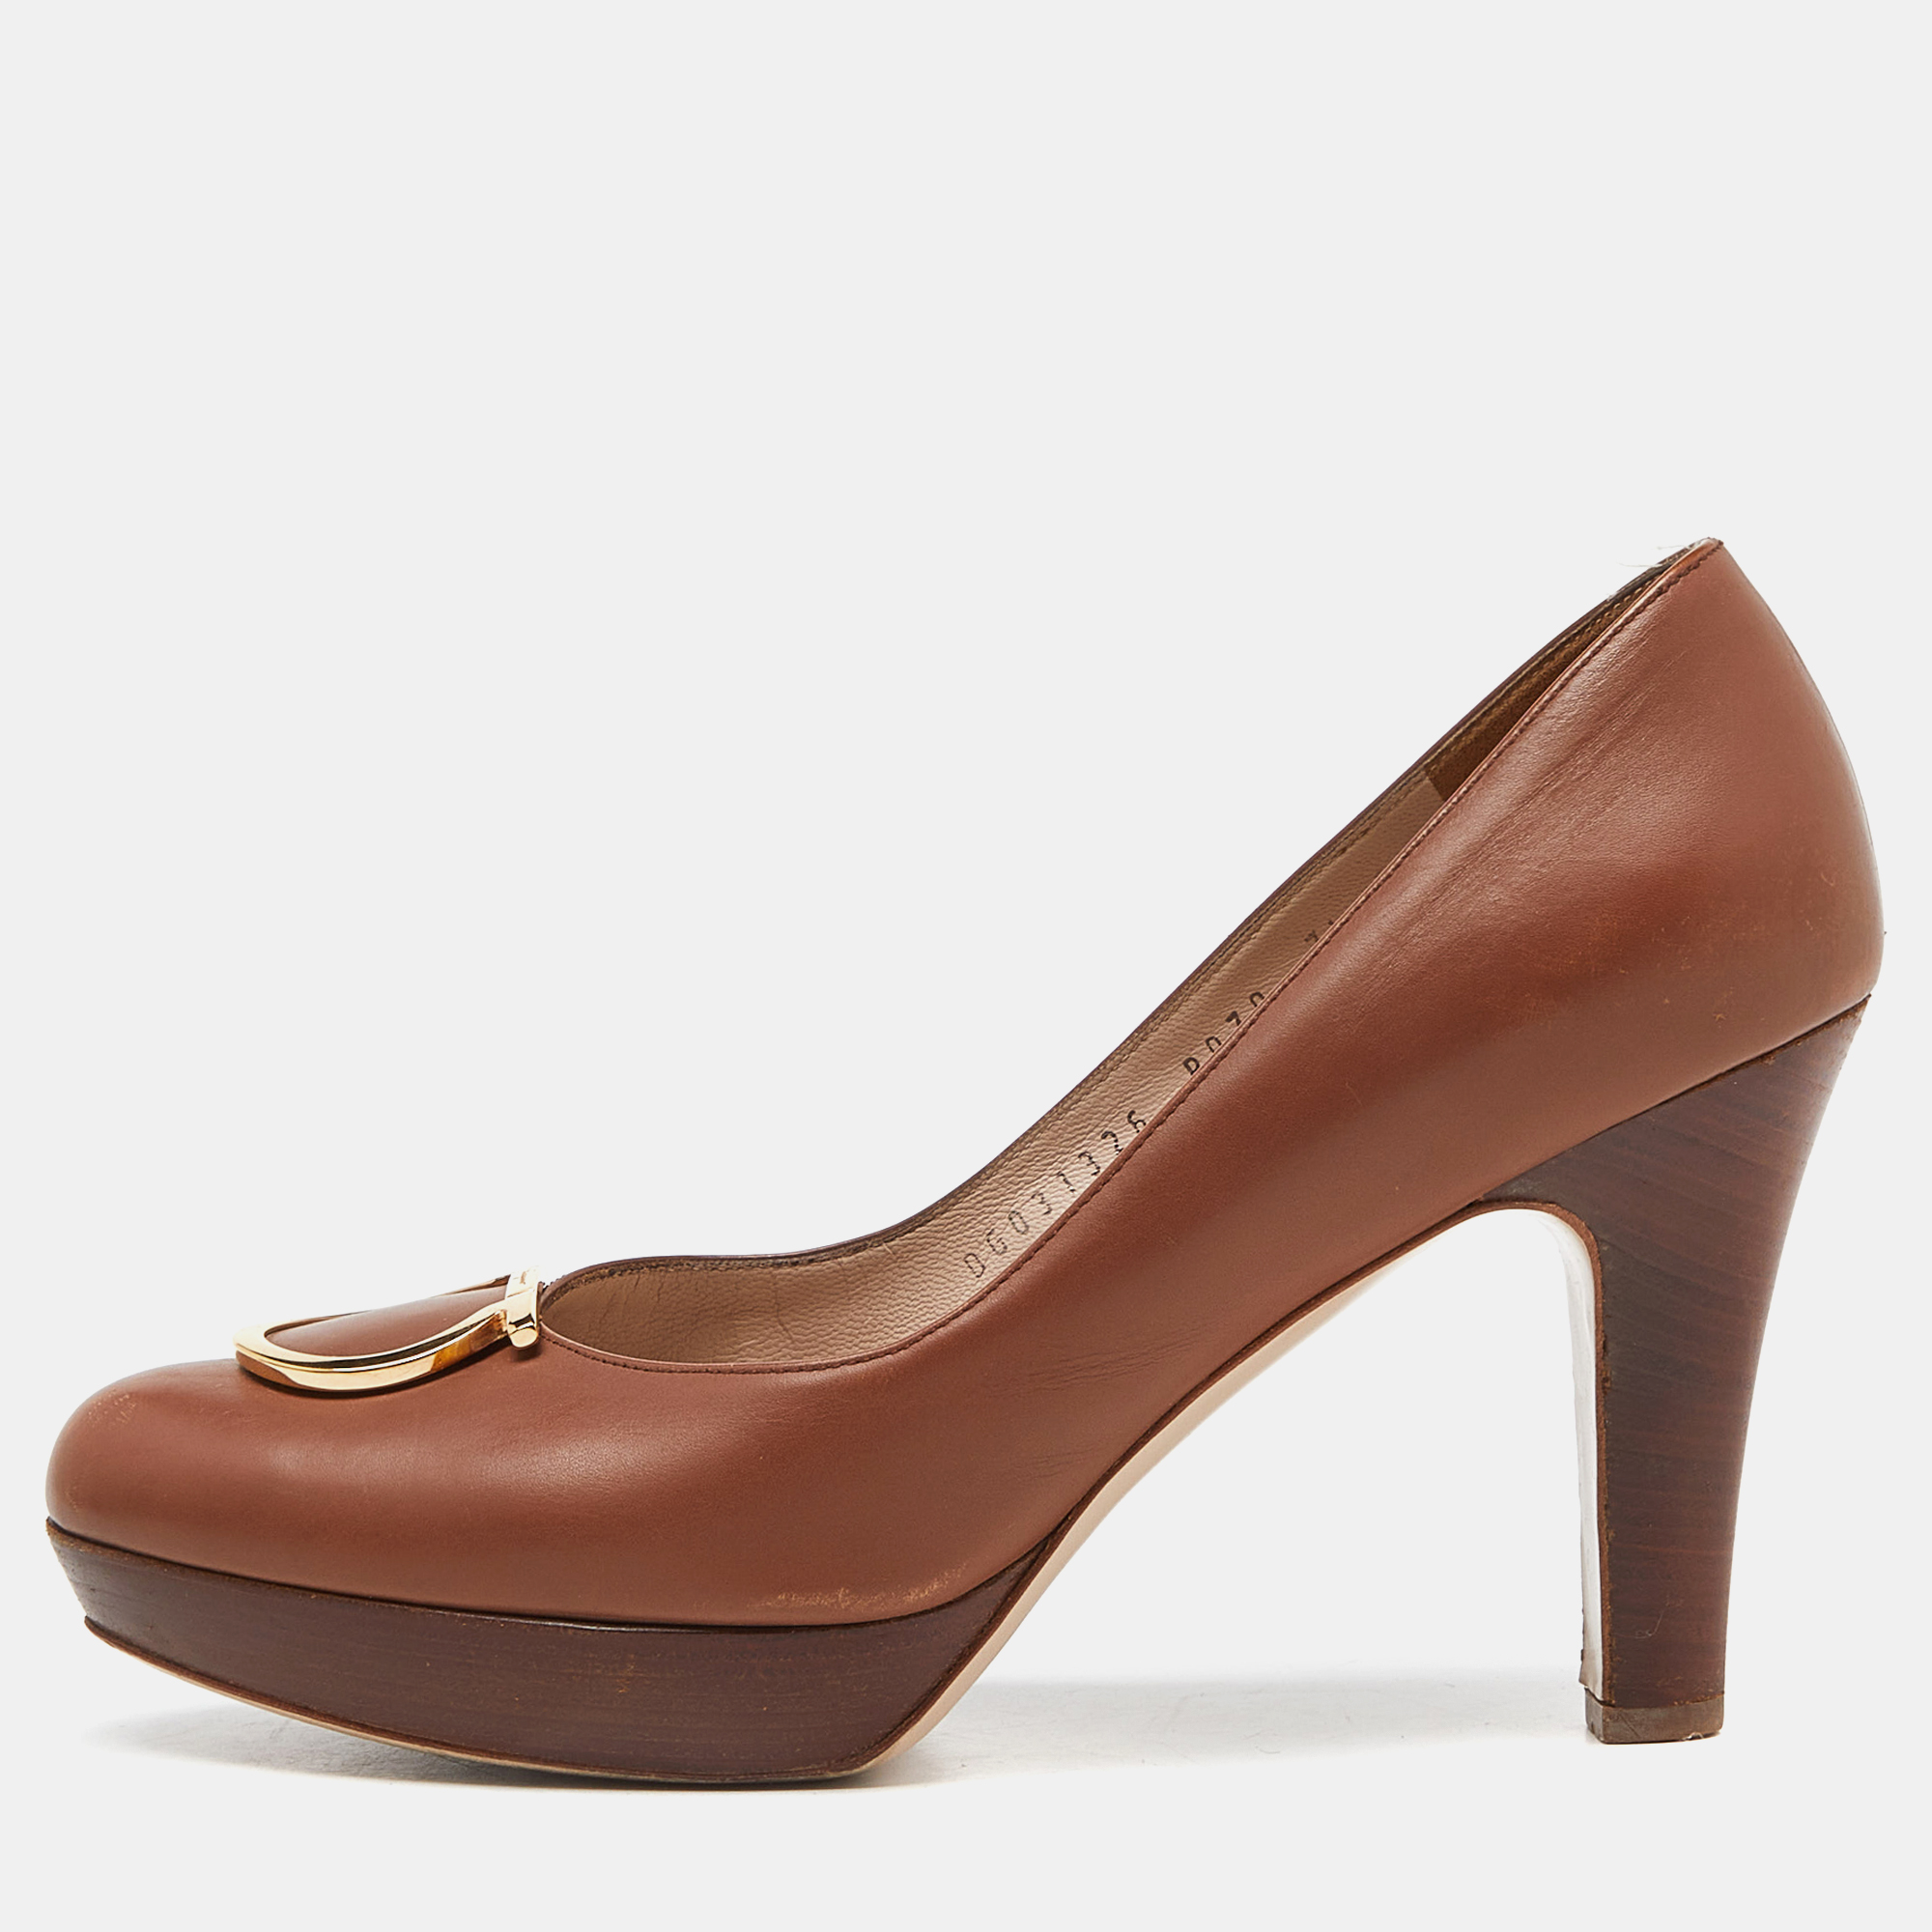 The branded buckle detailing on the toes offers this pair of Salvatore Ferragamo pumps a stylish twist. Constructed from leather its brown upper is perched on 10cm heels and these shoes are minimally designed with gold tone hardware.